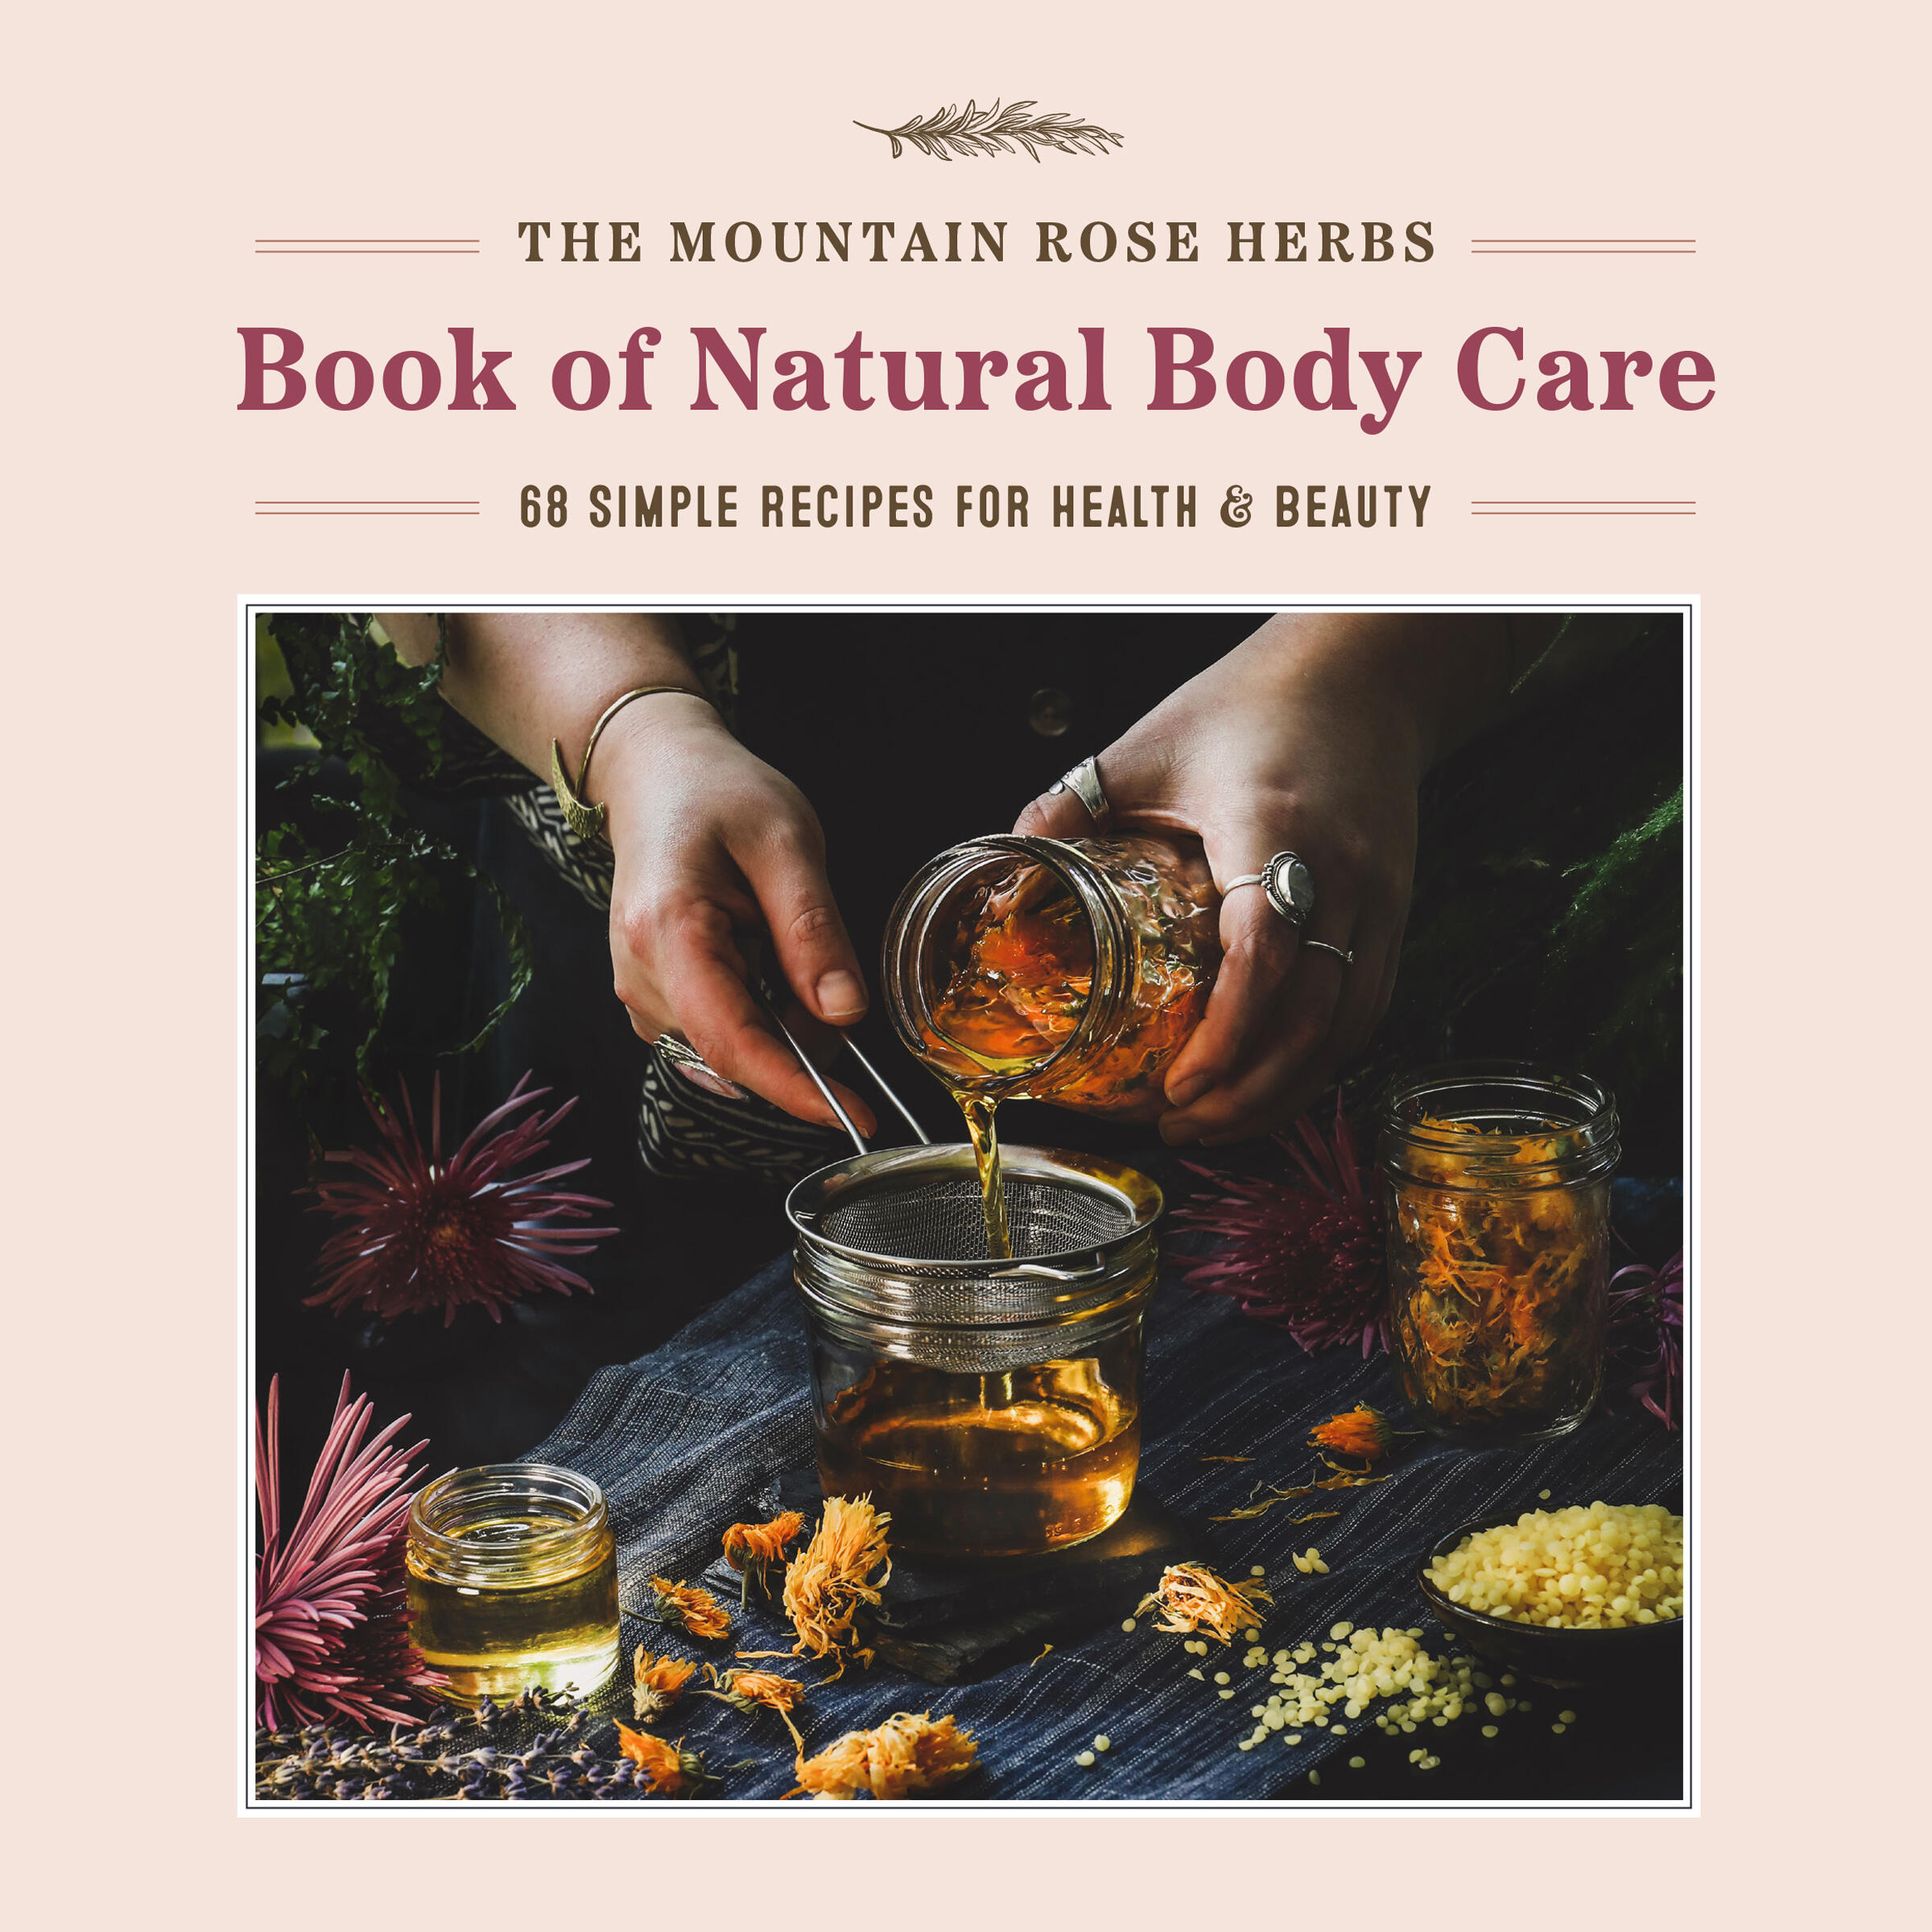 Best of Mountain rose herbs promo code 2016